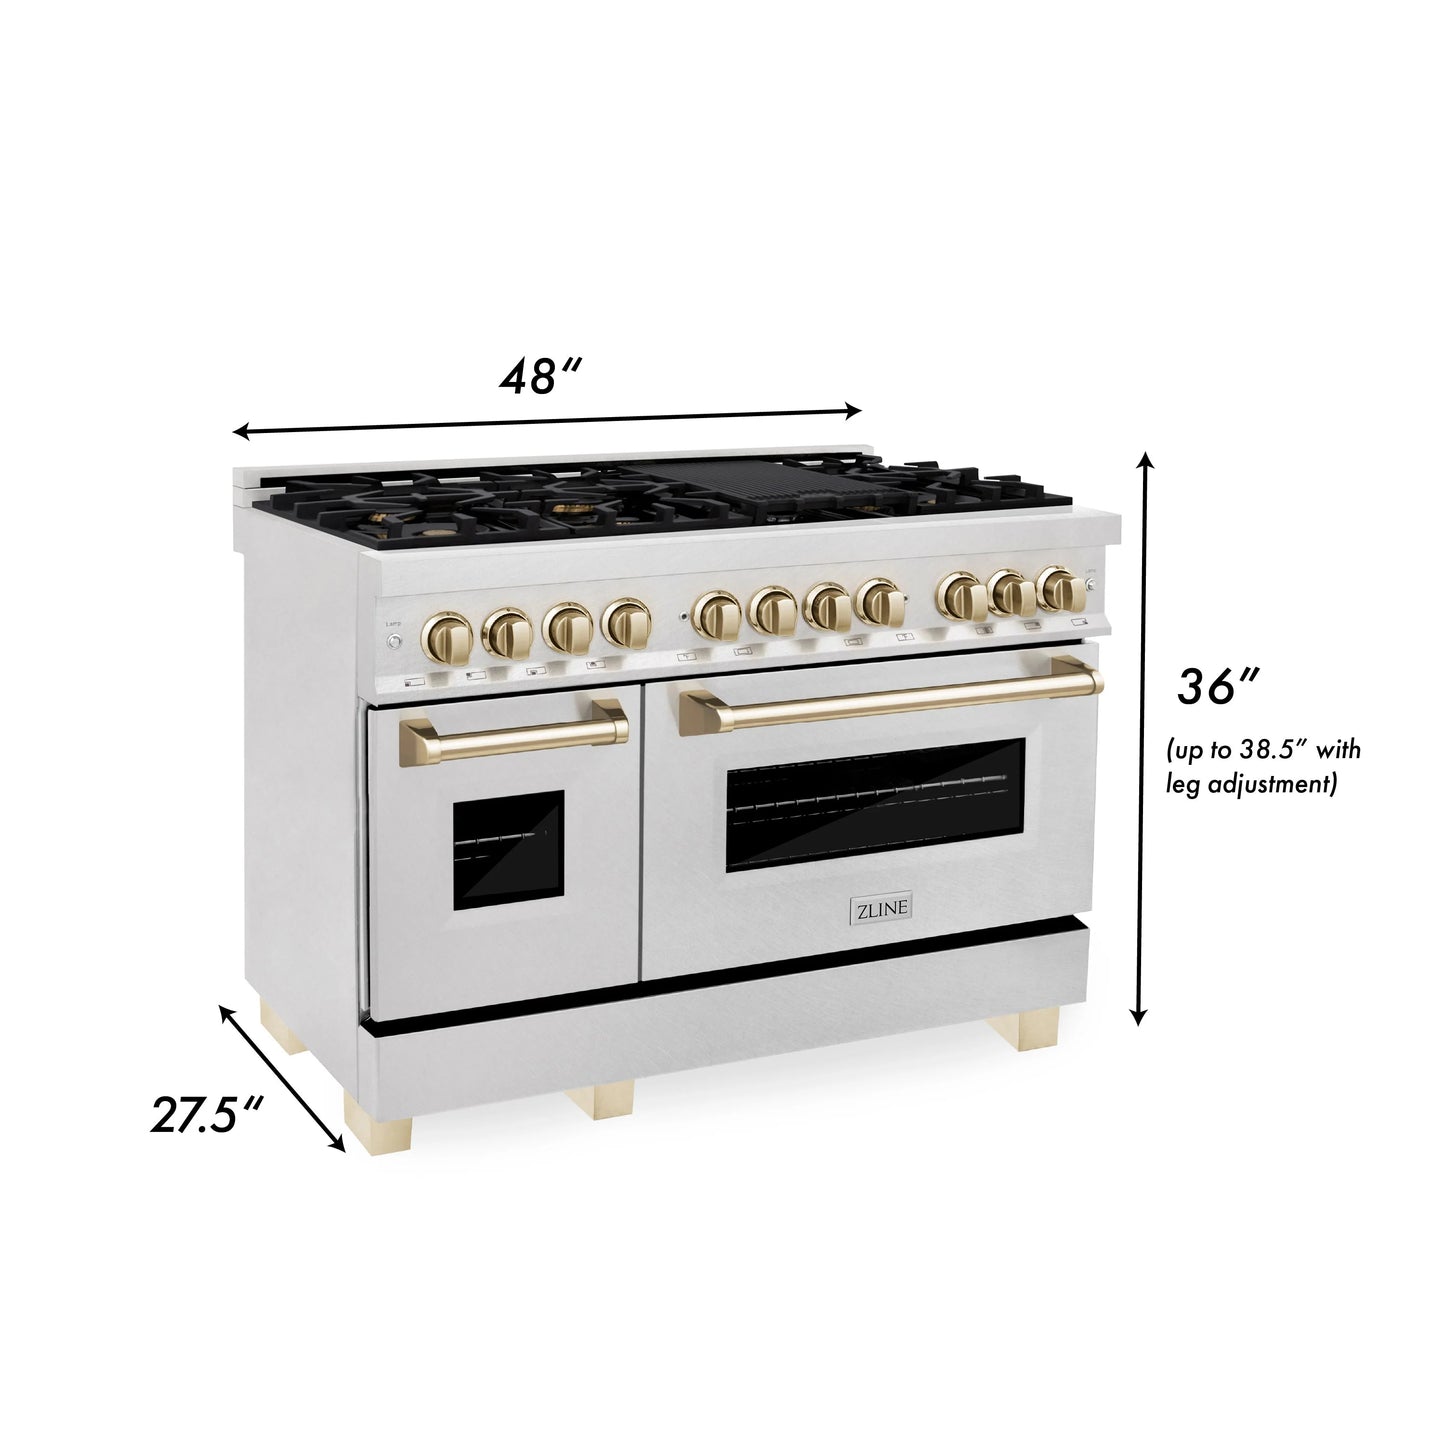 ZLINE Autograph Edition 48 in. Dual Fuel Range in DuraSnow Steel with Gold Accents (RASZ-SN-48-G)